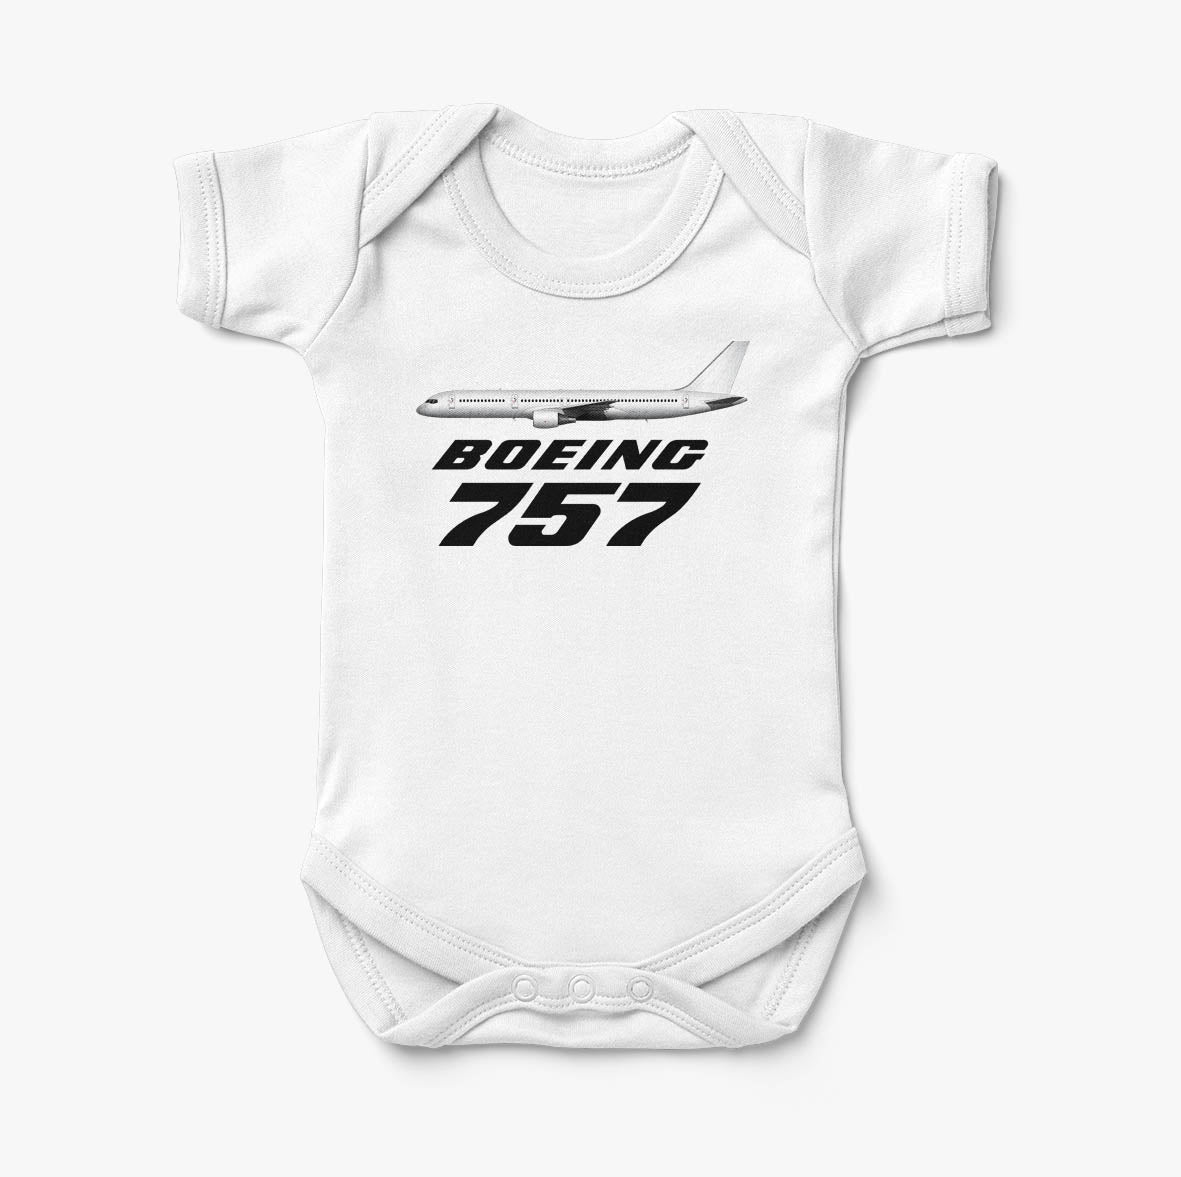 The Boeing 757 Designed Baby Bodysuits